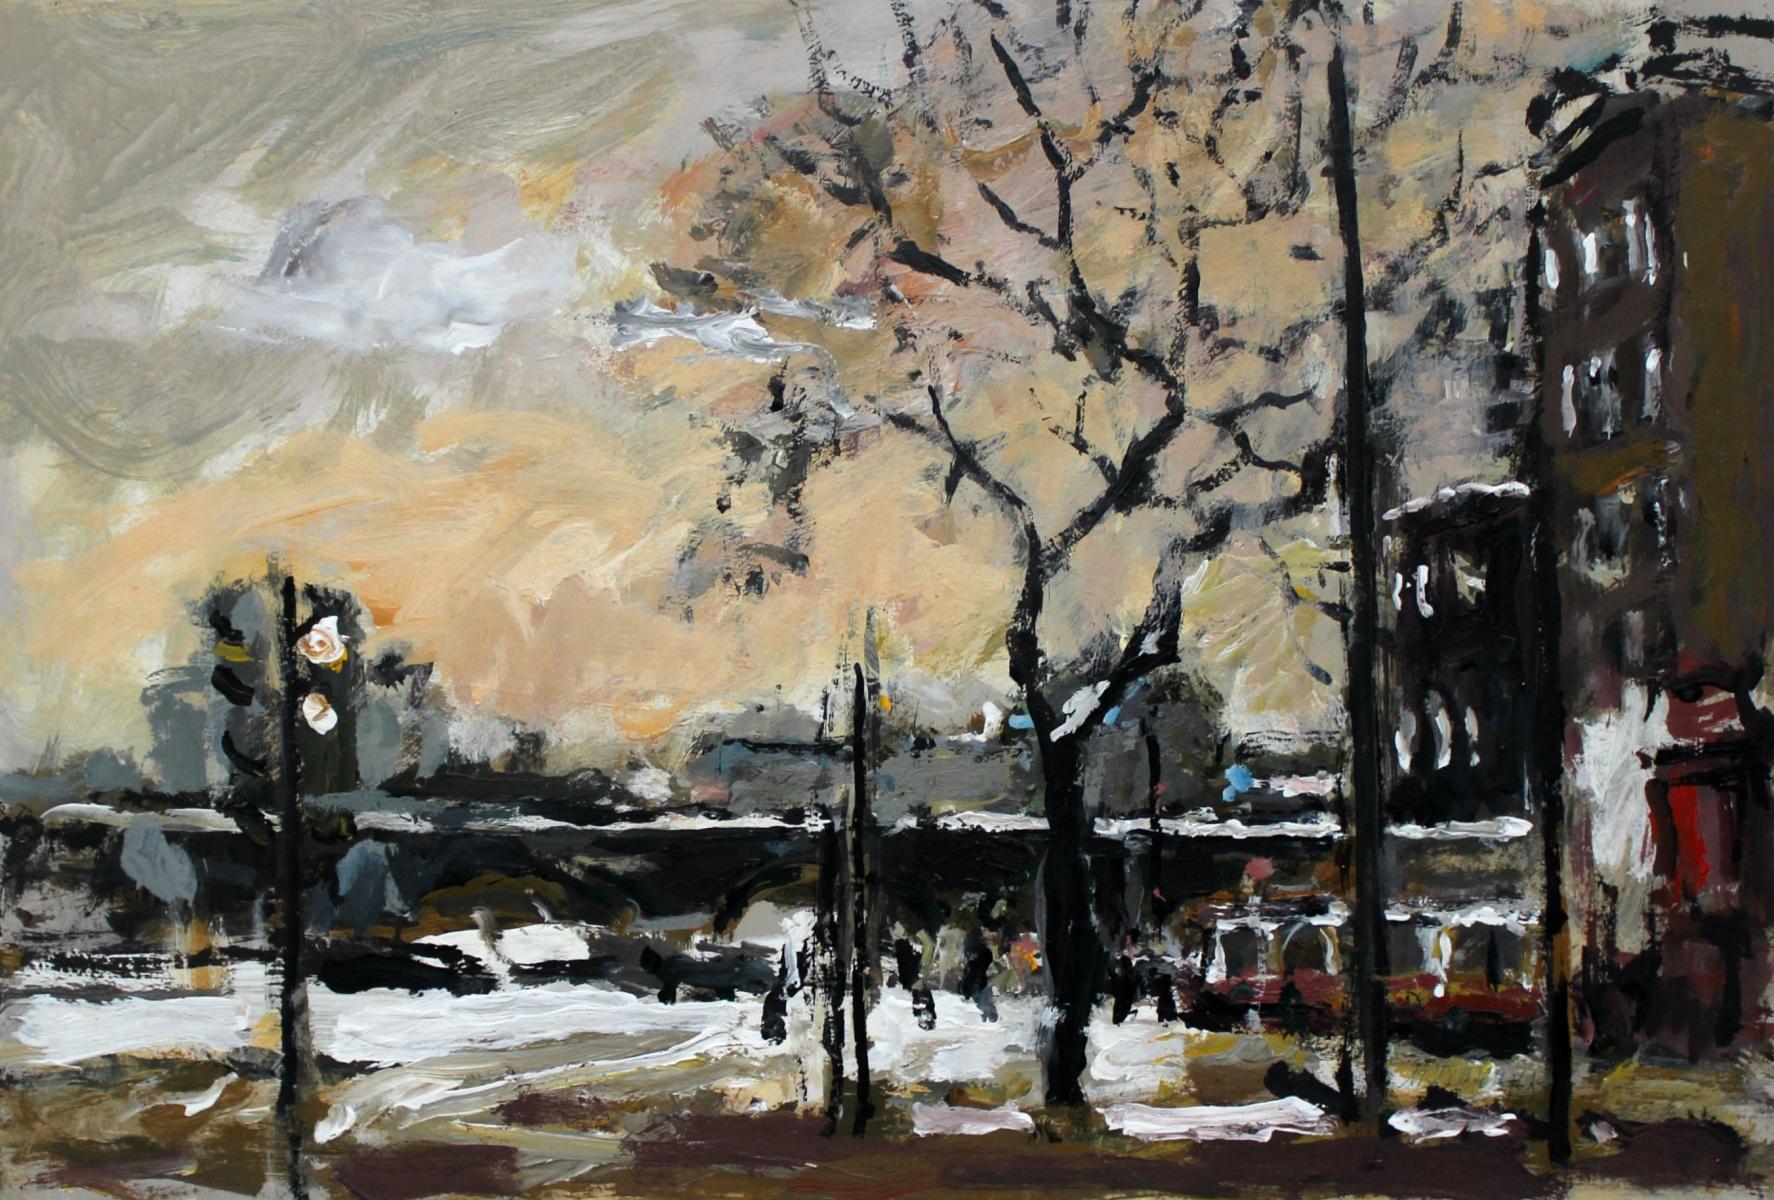 Magdalena Spasowicz Landscape Painting - The New Town - XXI century, Oil on canvas, Figurative, Landscape